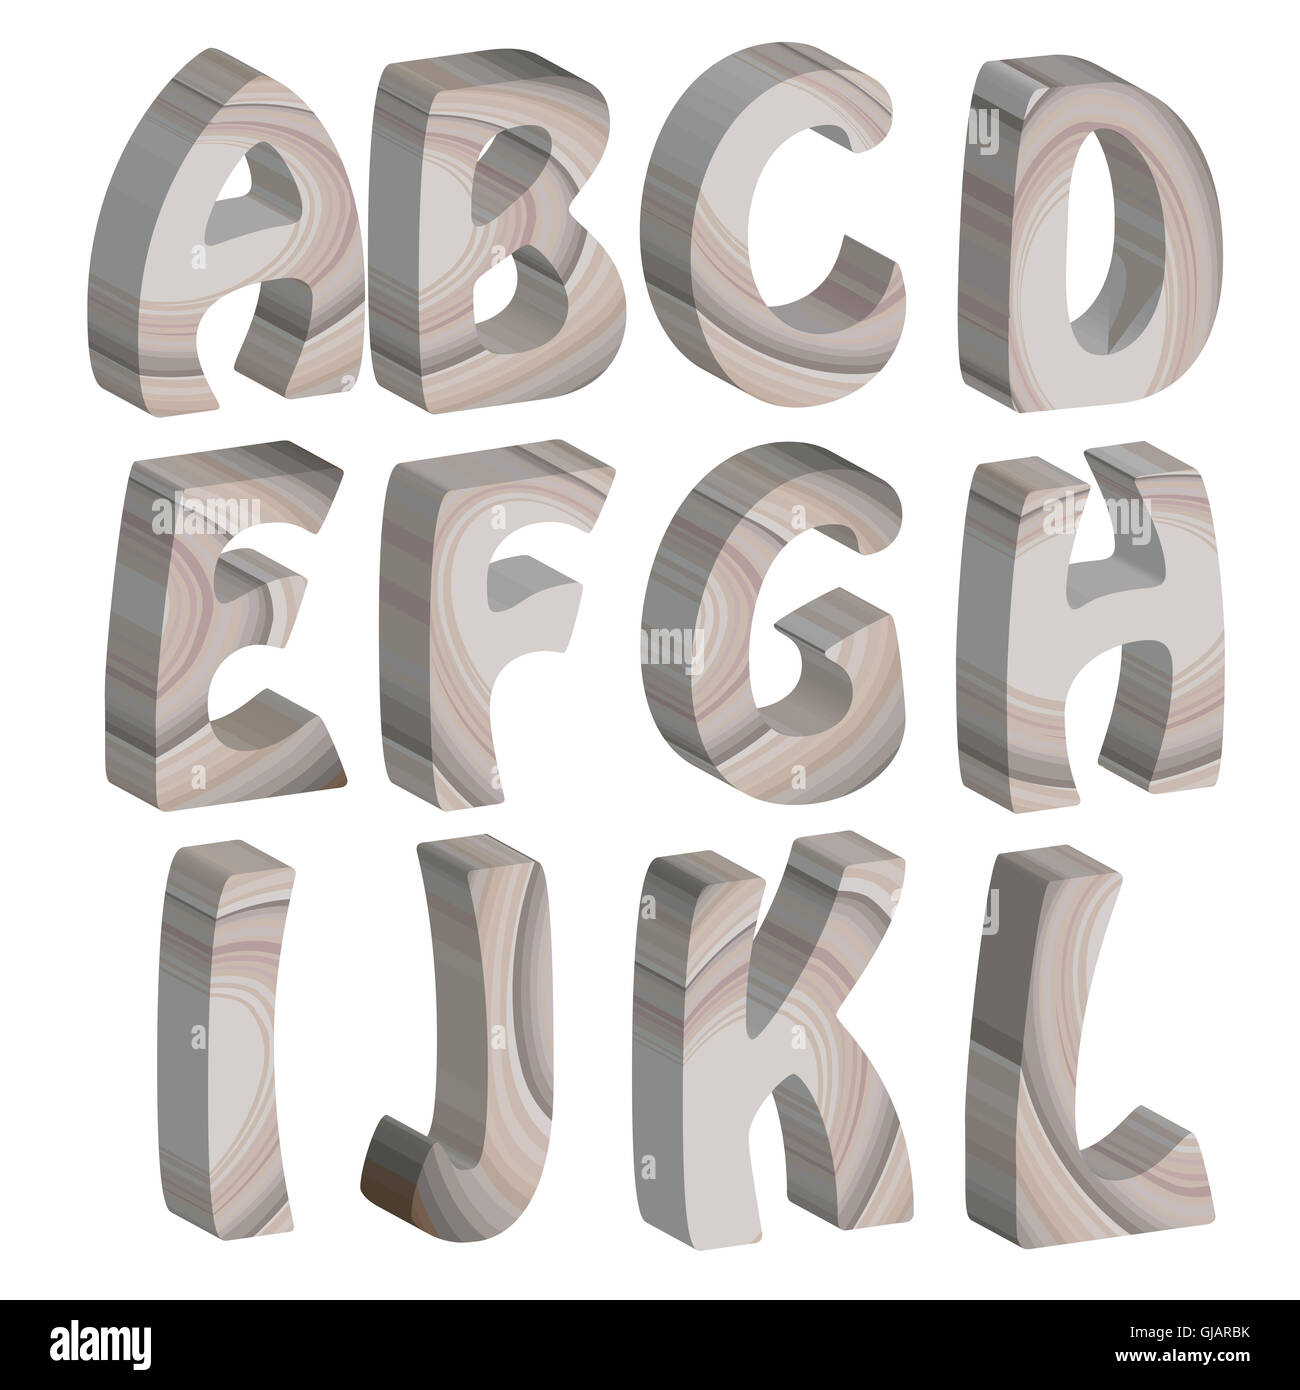 3D wooden letters of the alphabet Stock Photo